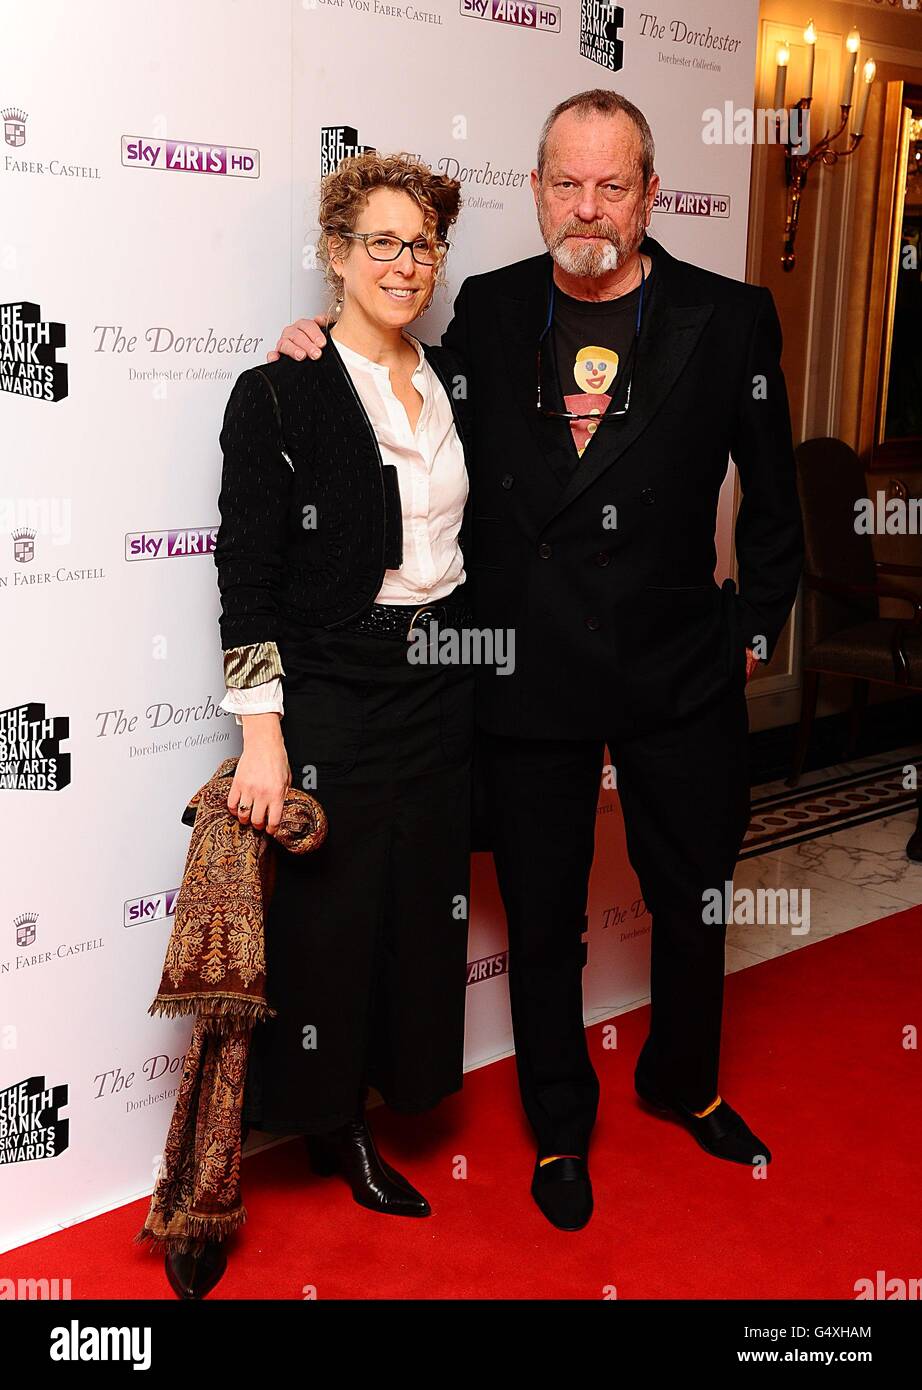 Terry Gilliam and Leah Hausman arriving for the 2012 South Bank Sky Arts Awards at the Dorchester Hotel, Park Lane, London Stock Photo